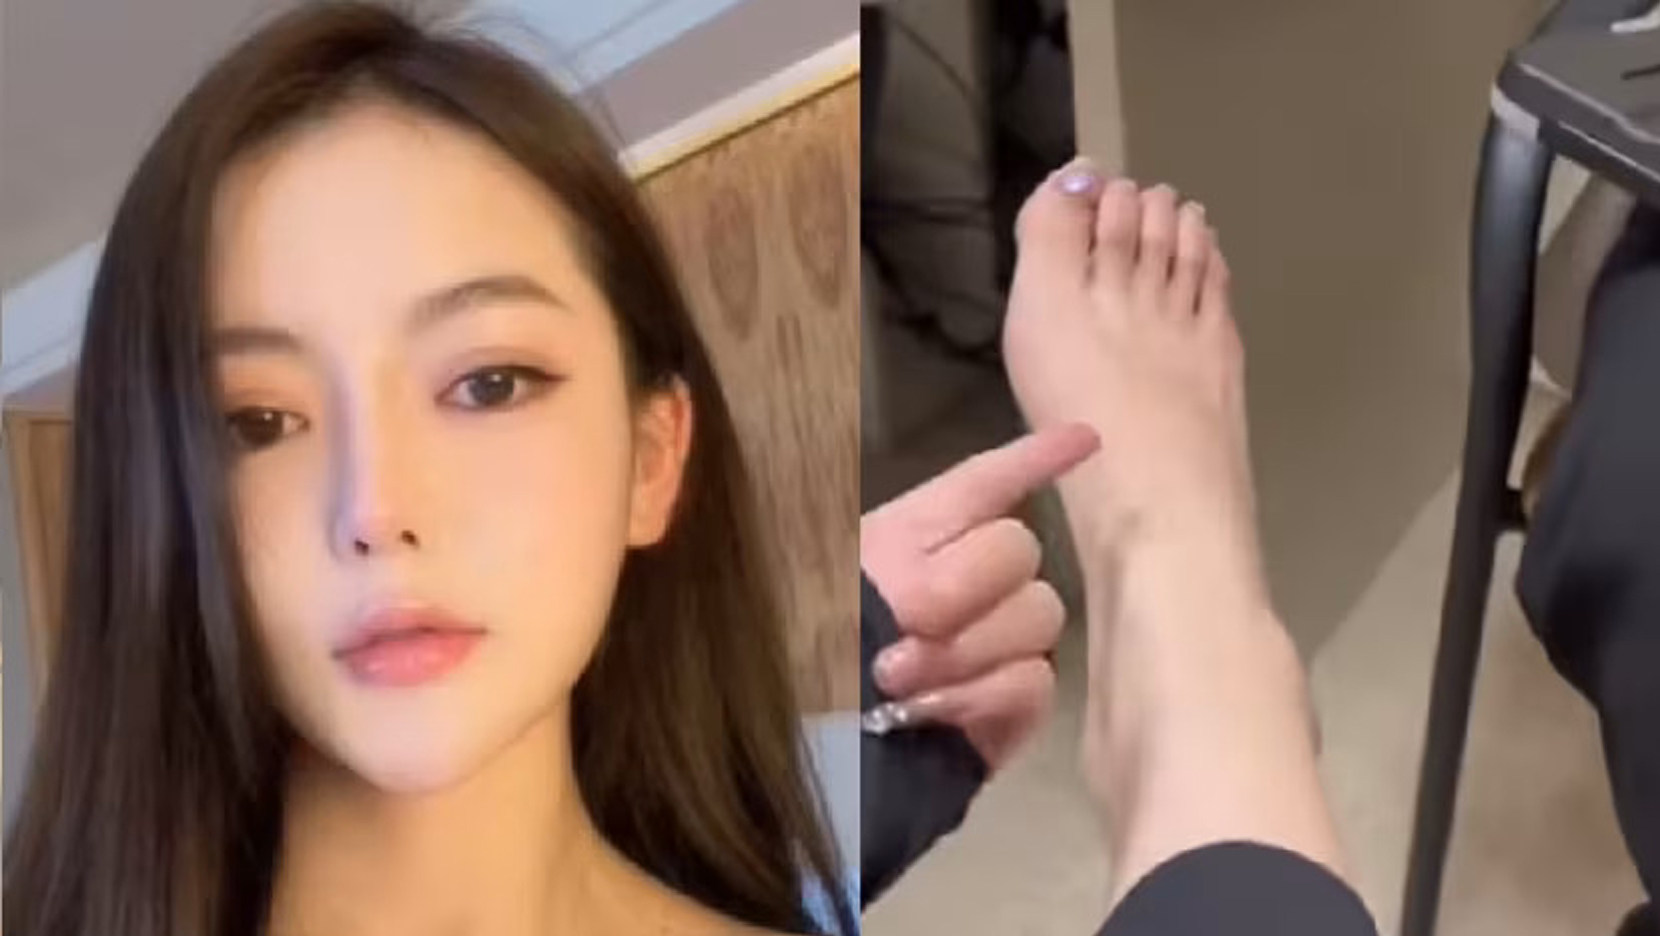 Chinese national Han Feizi, 29, posted videos of herself on TikTok arguing with Singapore police in hospital after a driver reportedly deliberately ran over her foot. Photos: Douyin/TikTok via CNA